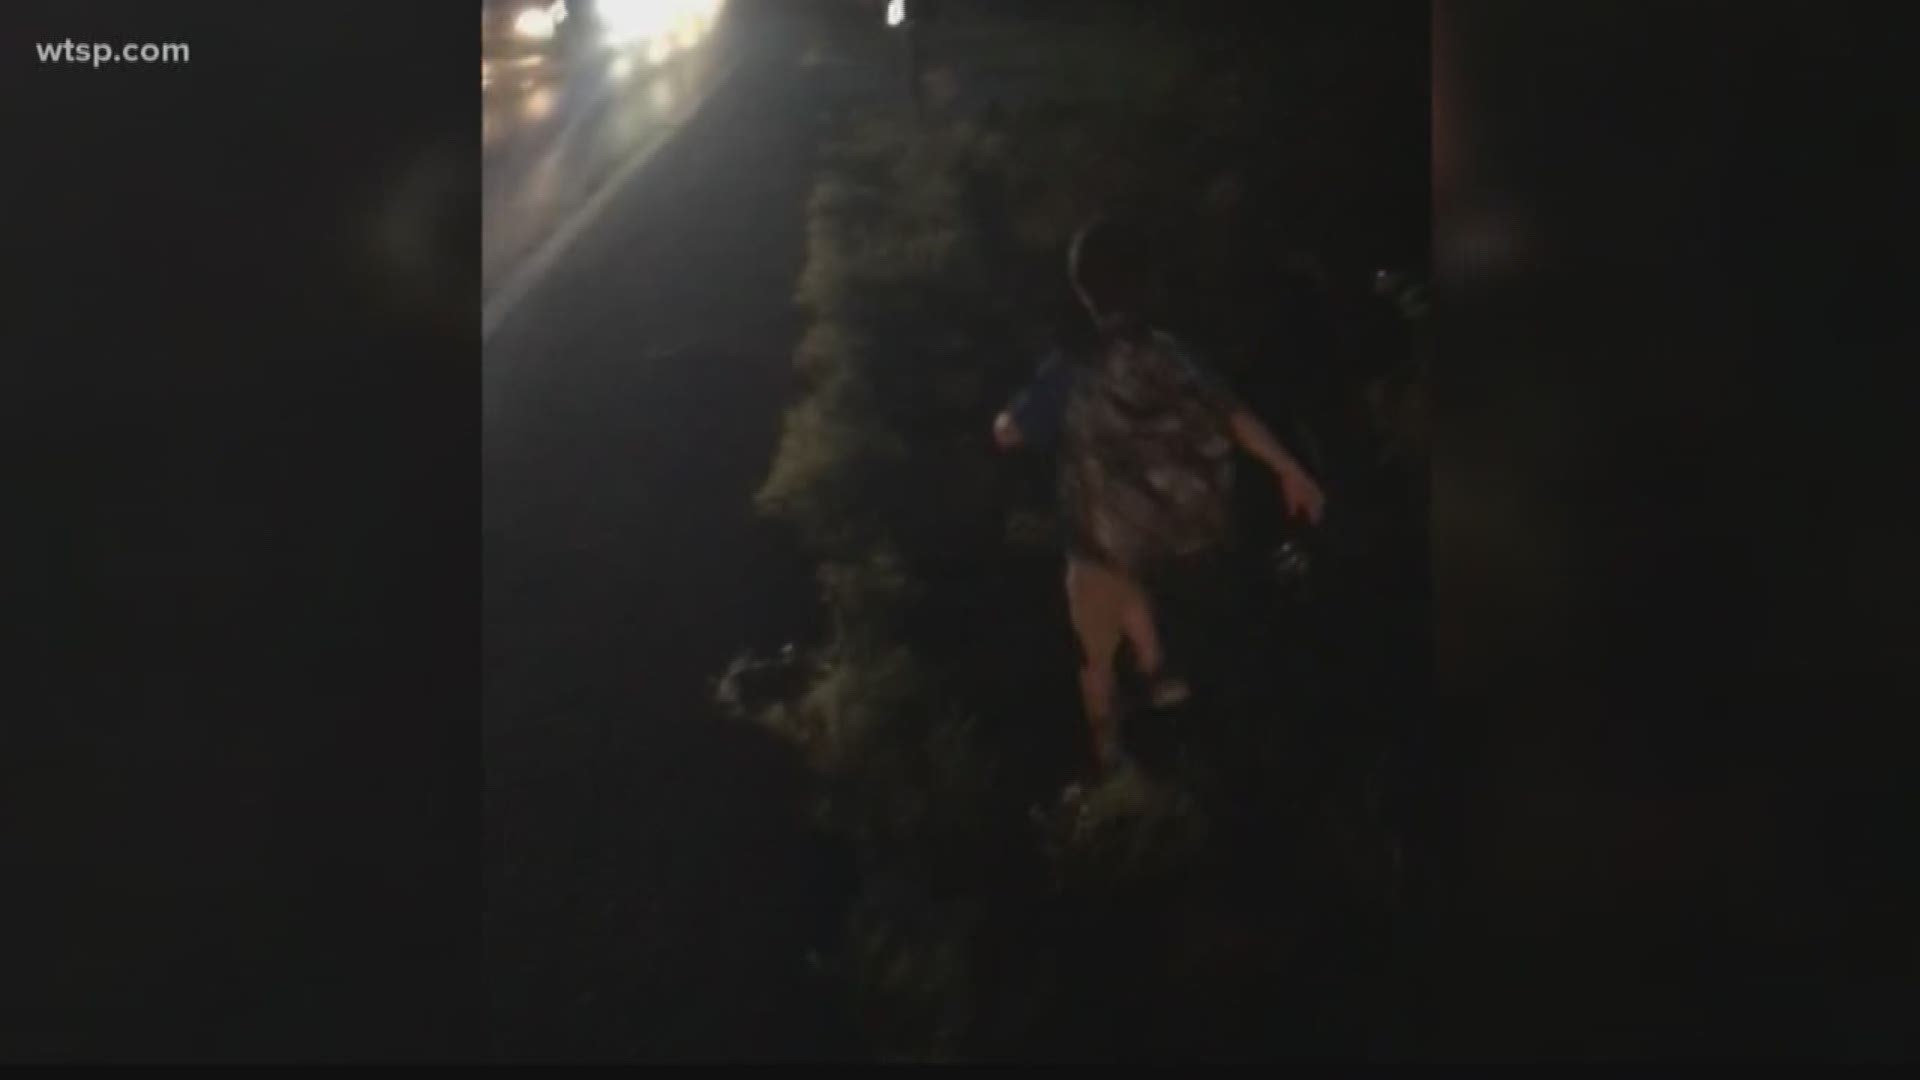 Samuel Morris posted a Facebook video showing his son running along Gunn Highway to get to his bus stop. There's no sidewalk and there are no street lights.